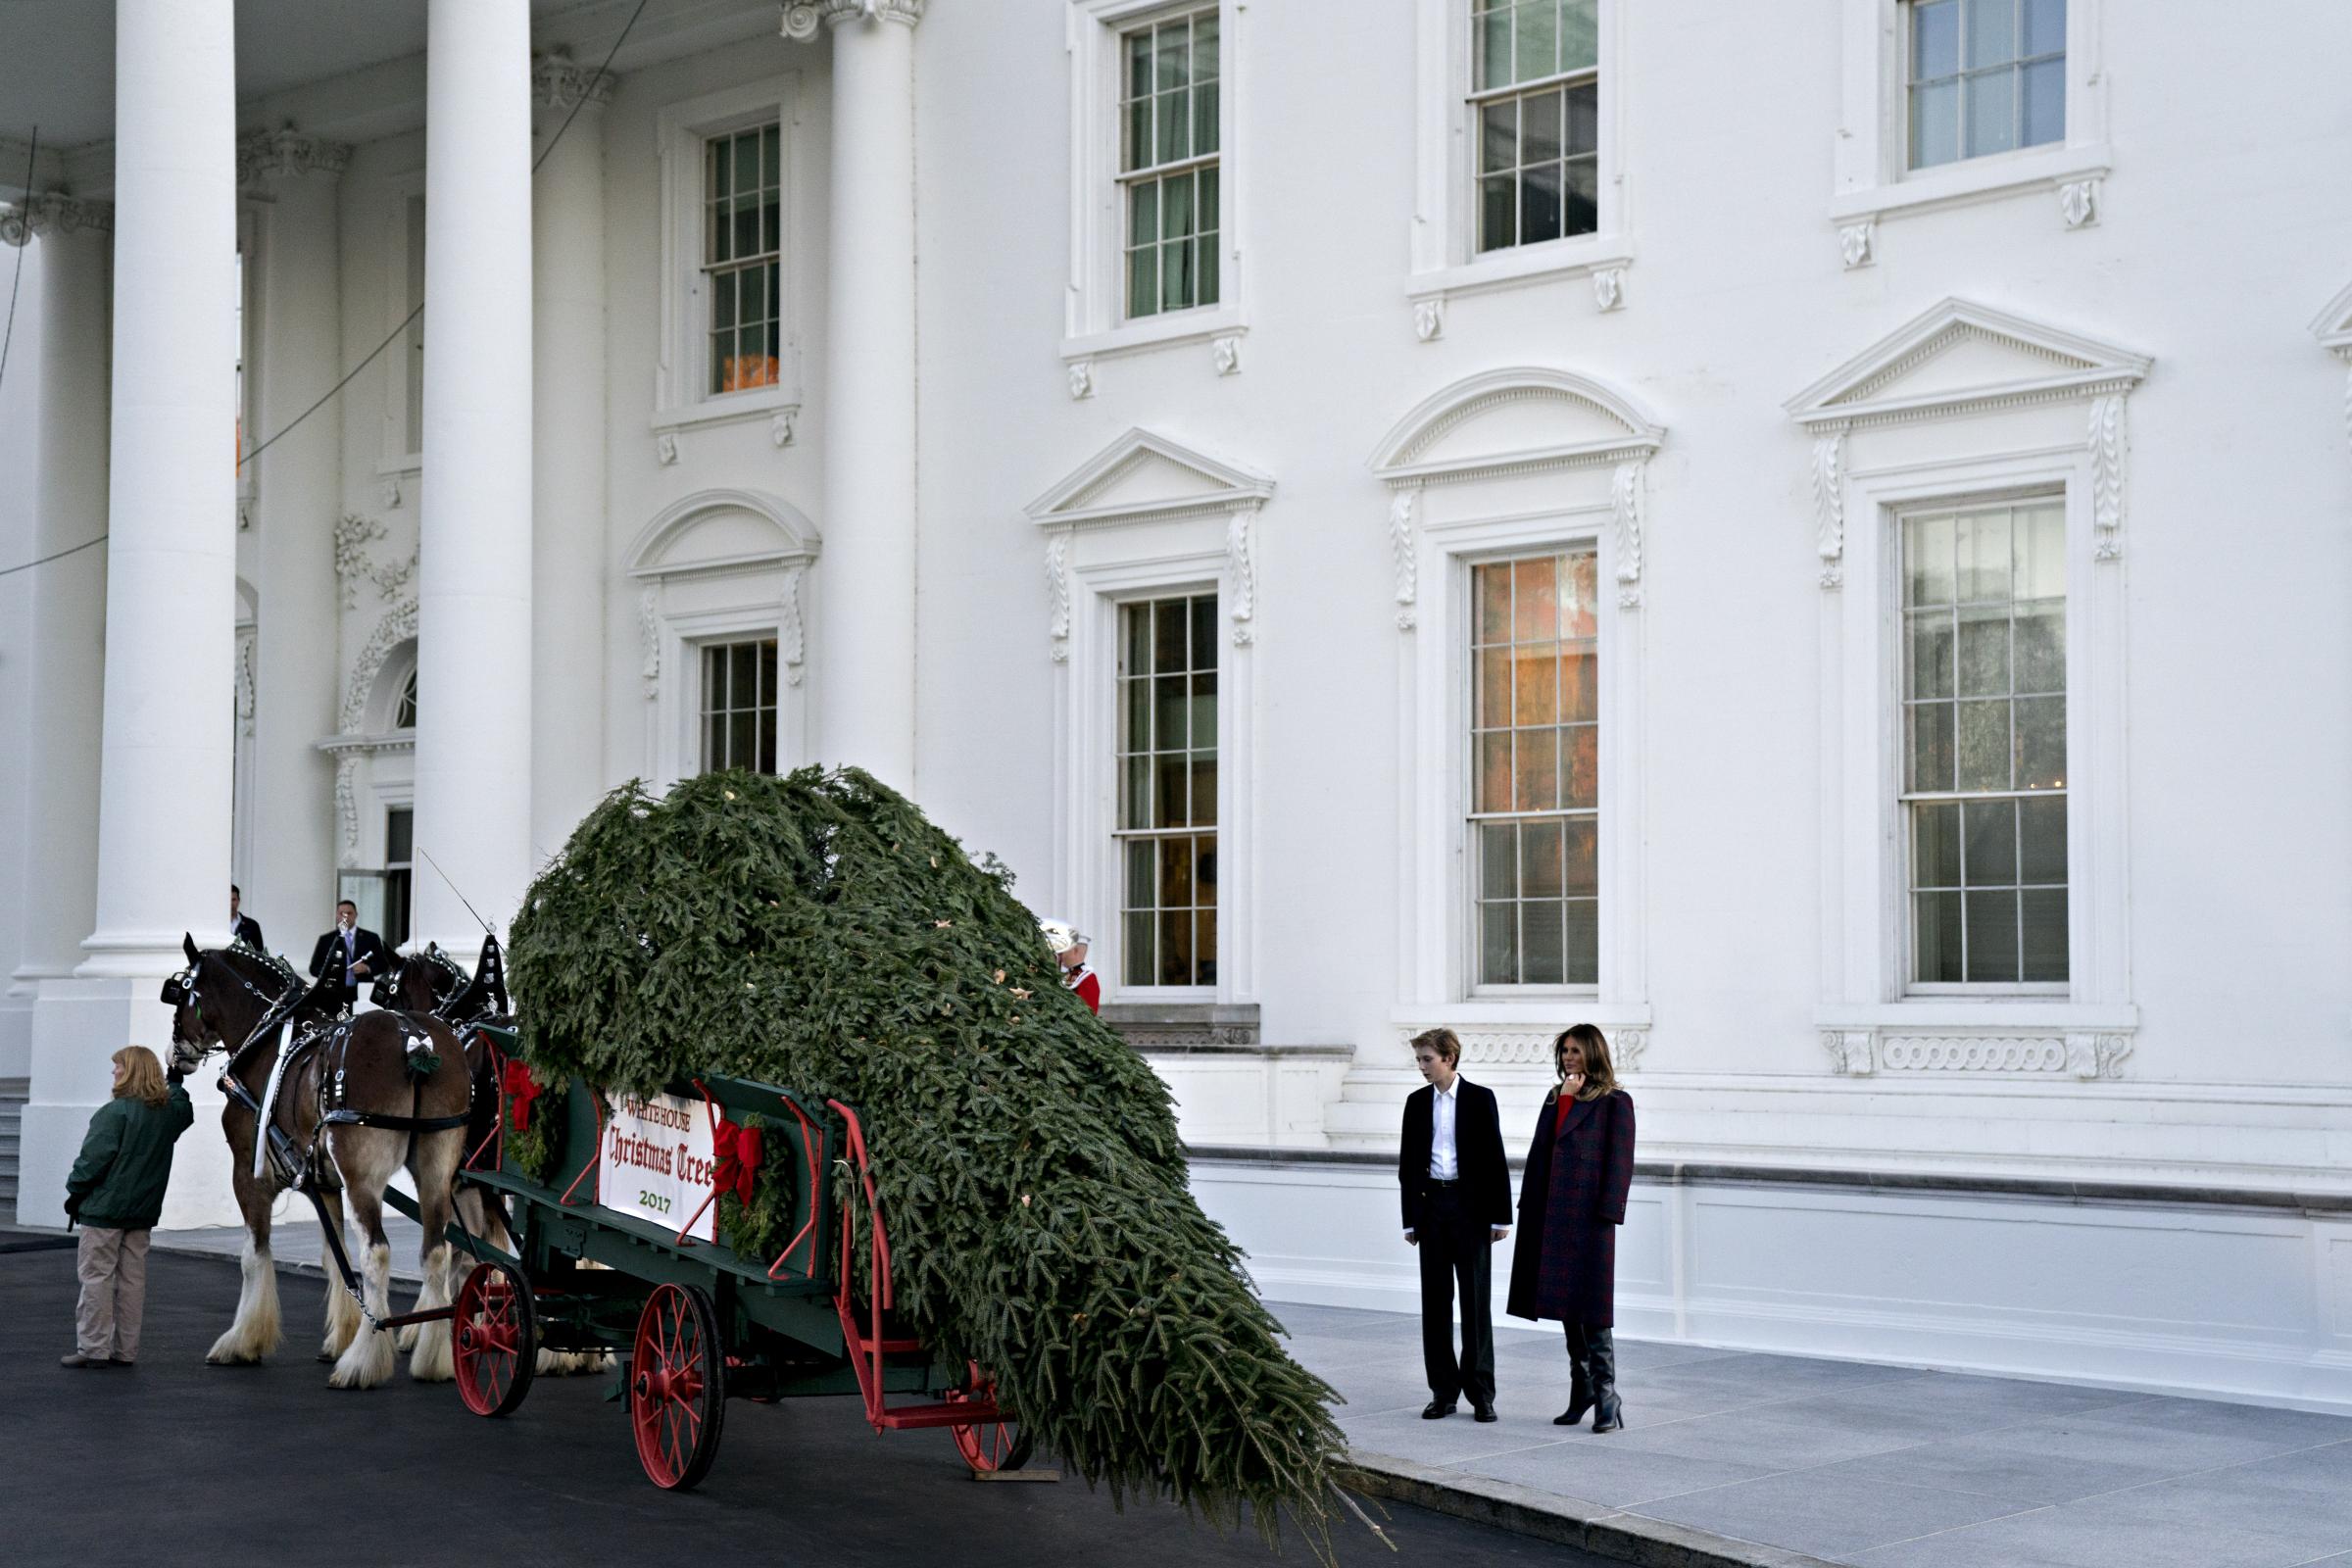 presented the Wisconsin-grown Christmas Tree to Melania and the tree will be displayed in the White House Blue Room.